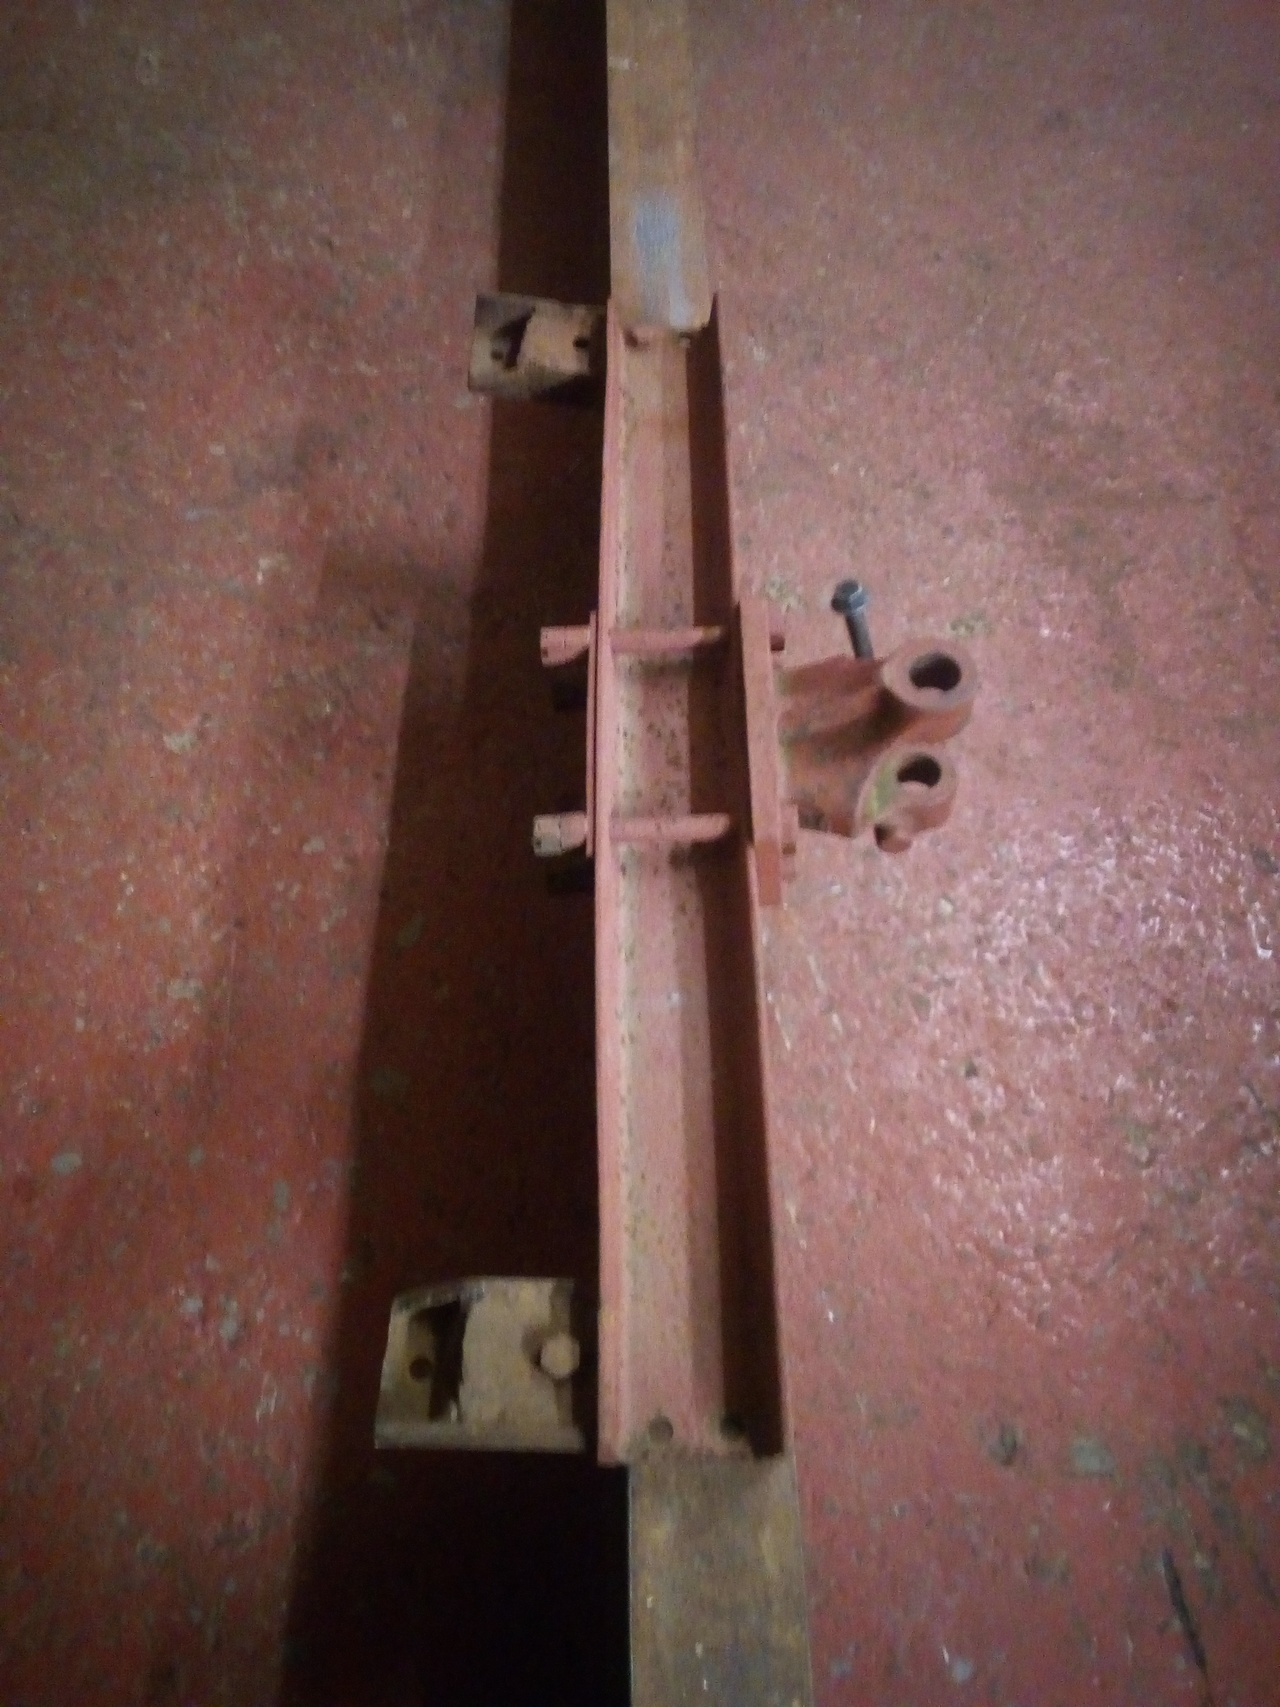 The front tow-beam from the truck, sitting on the workshop
floor. The beam is twisted and bent.